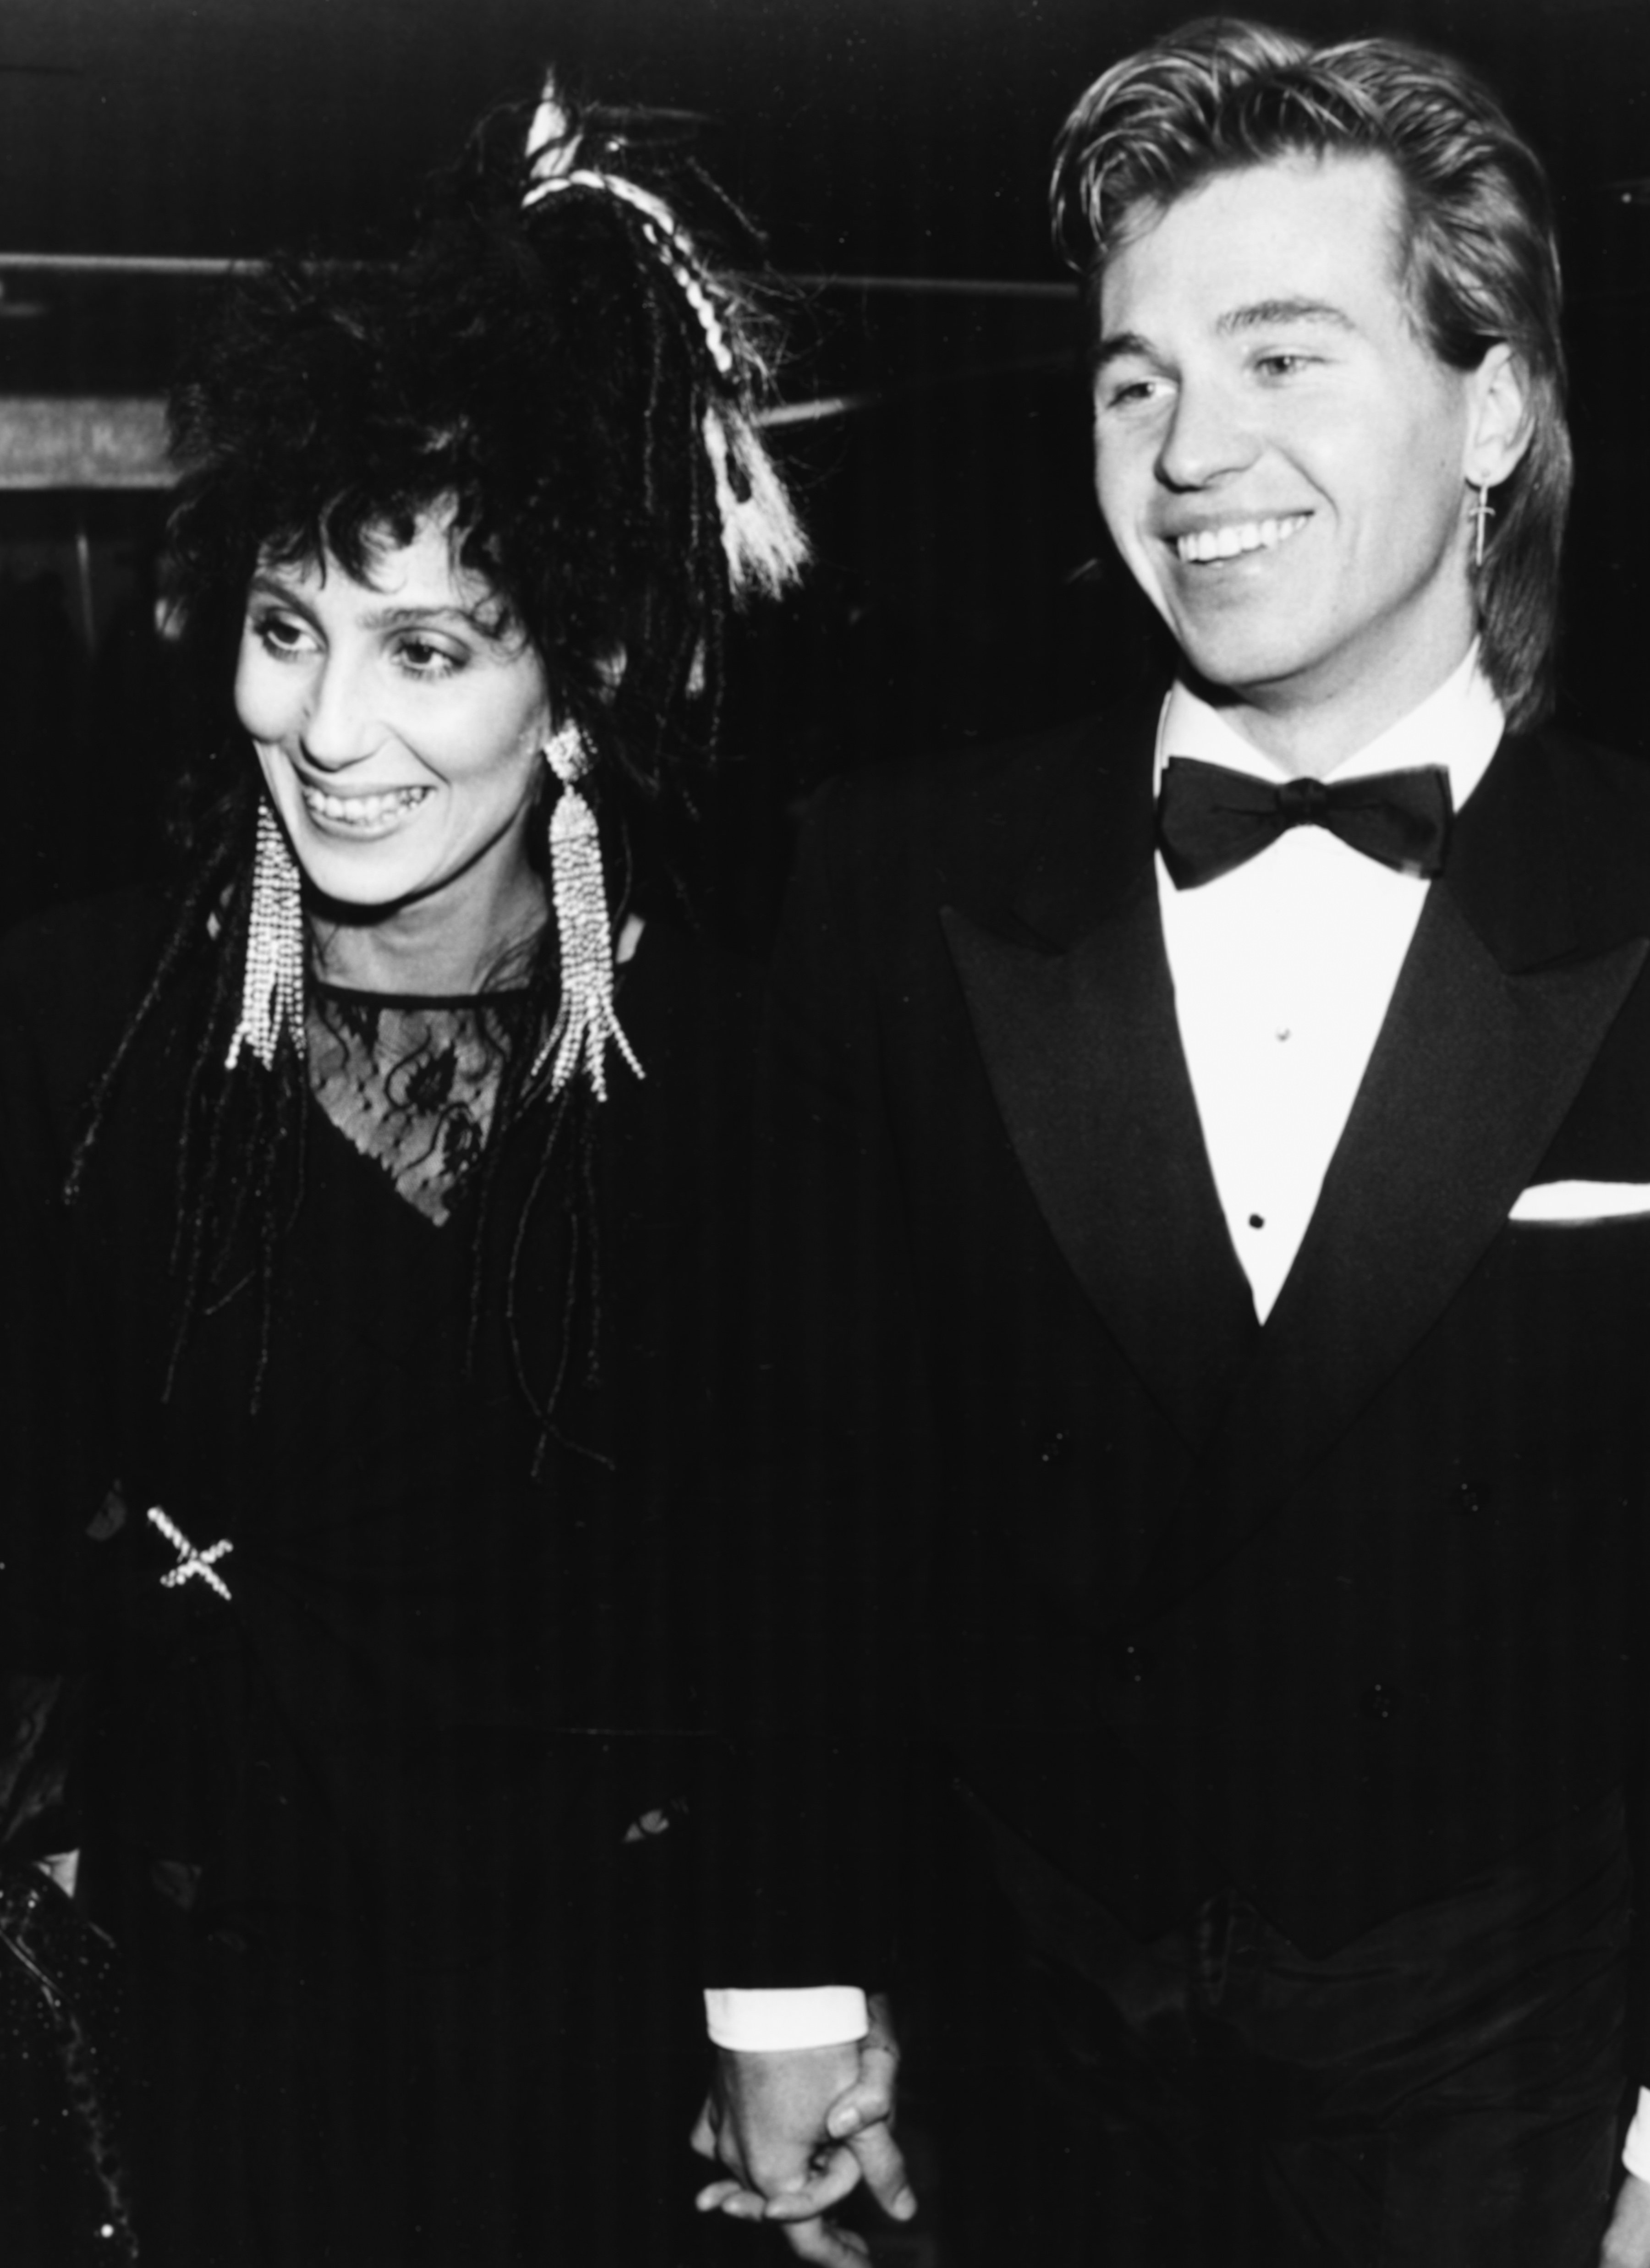 Singer Cher and actor Val Kilmer attending the BAFTA Awards hand in hand, London, March 25, 1984. | Source: Getty Images.